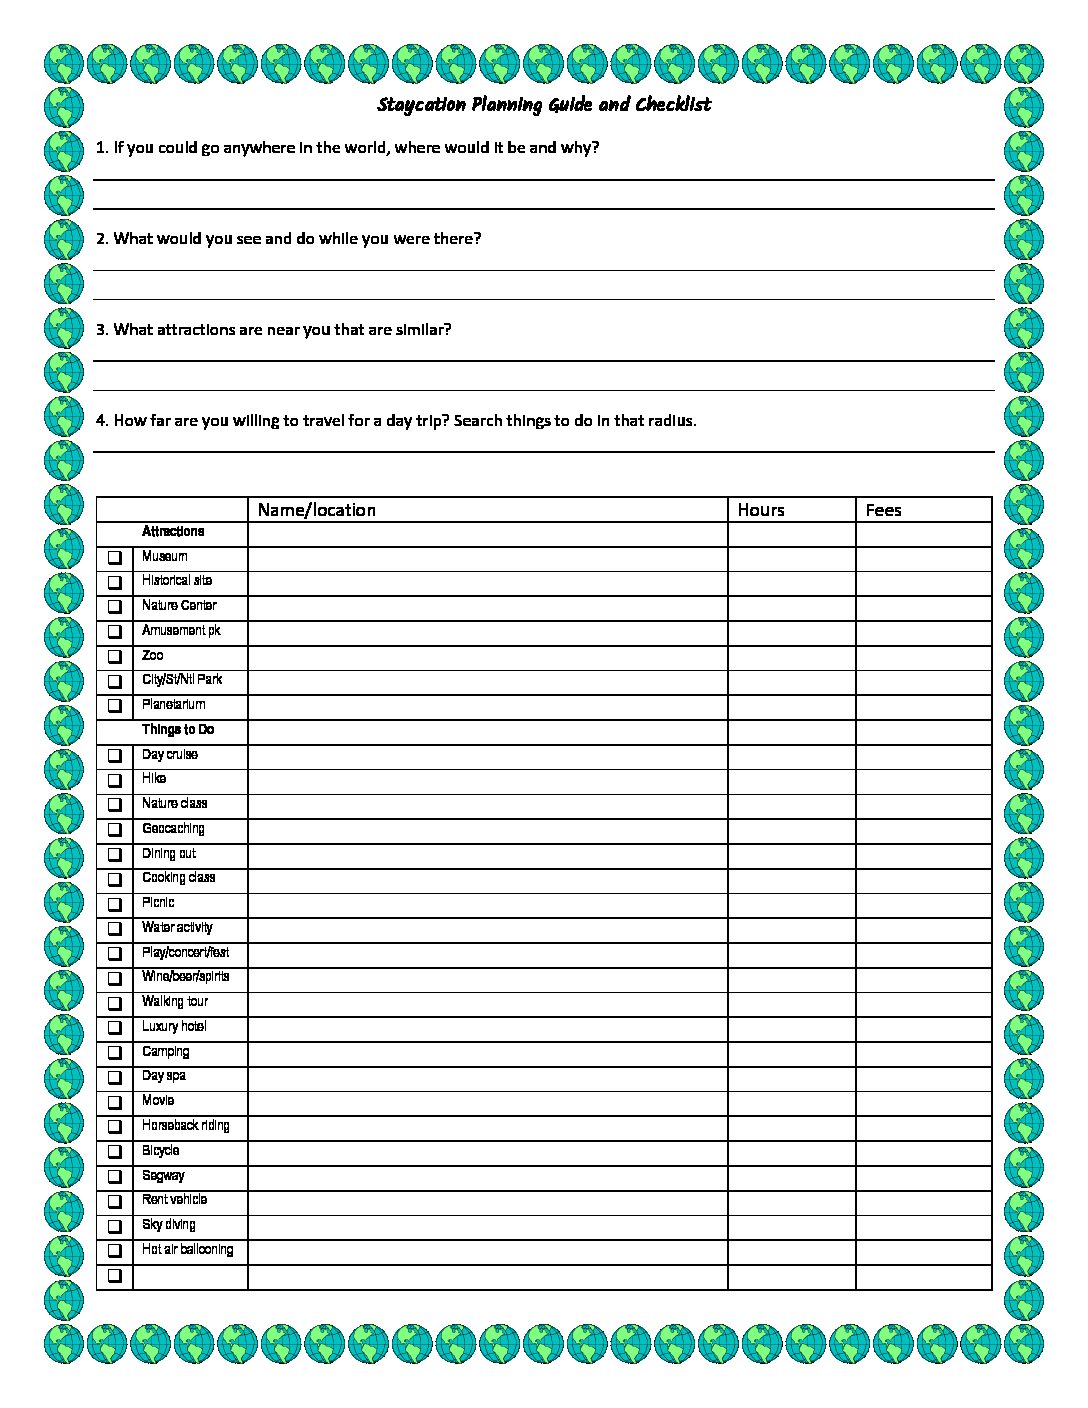 Staycation Planning Guide and Checklist